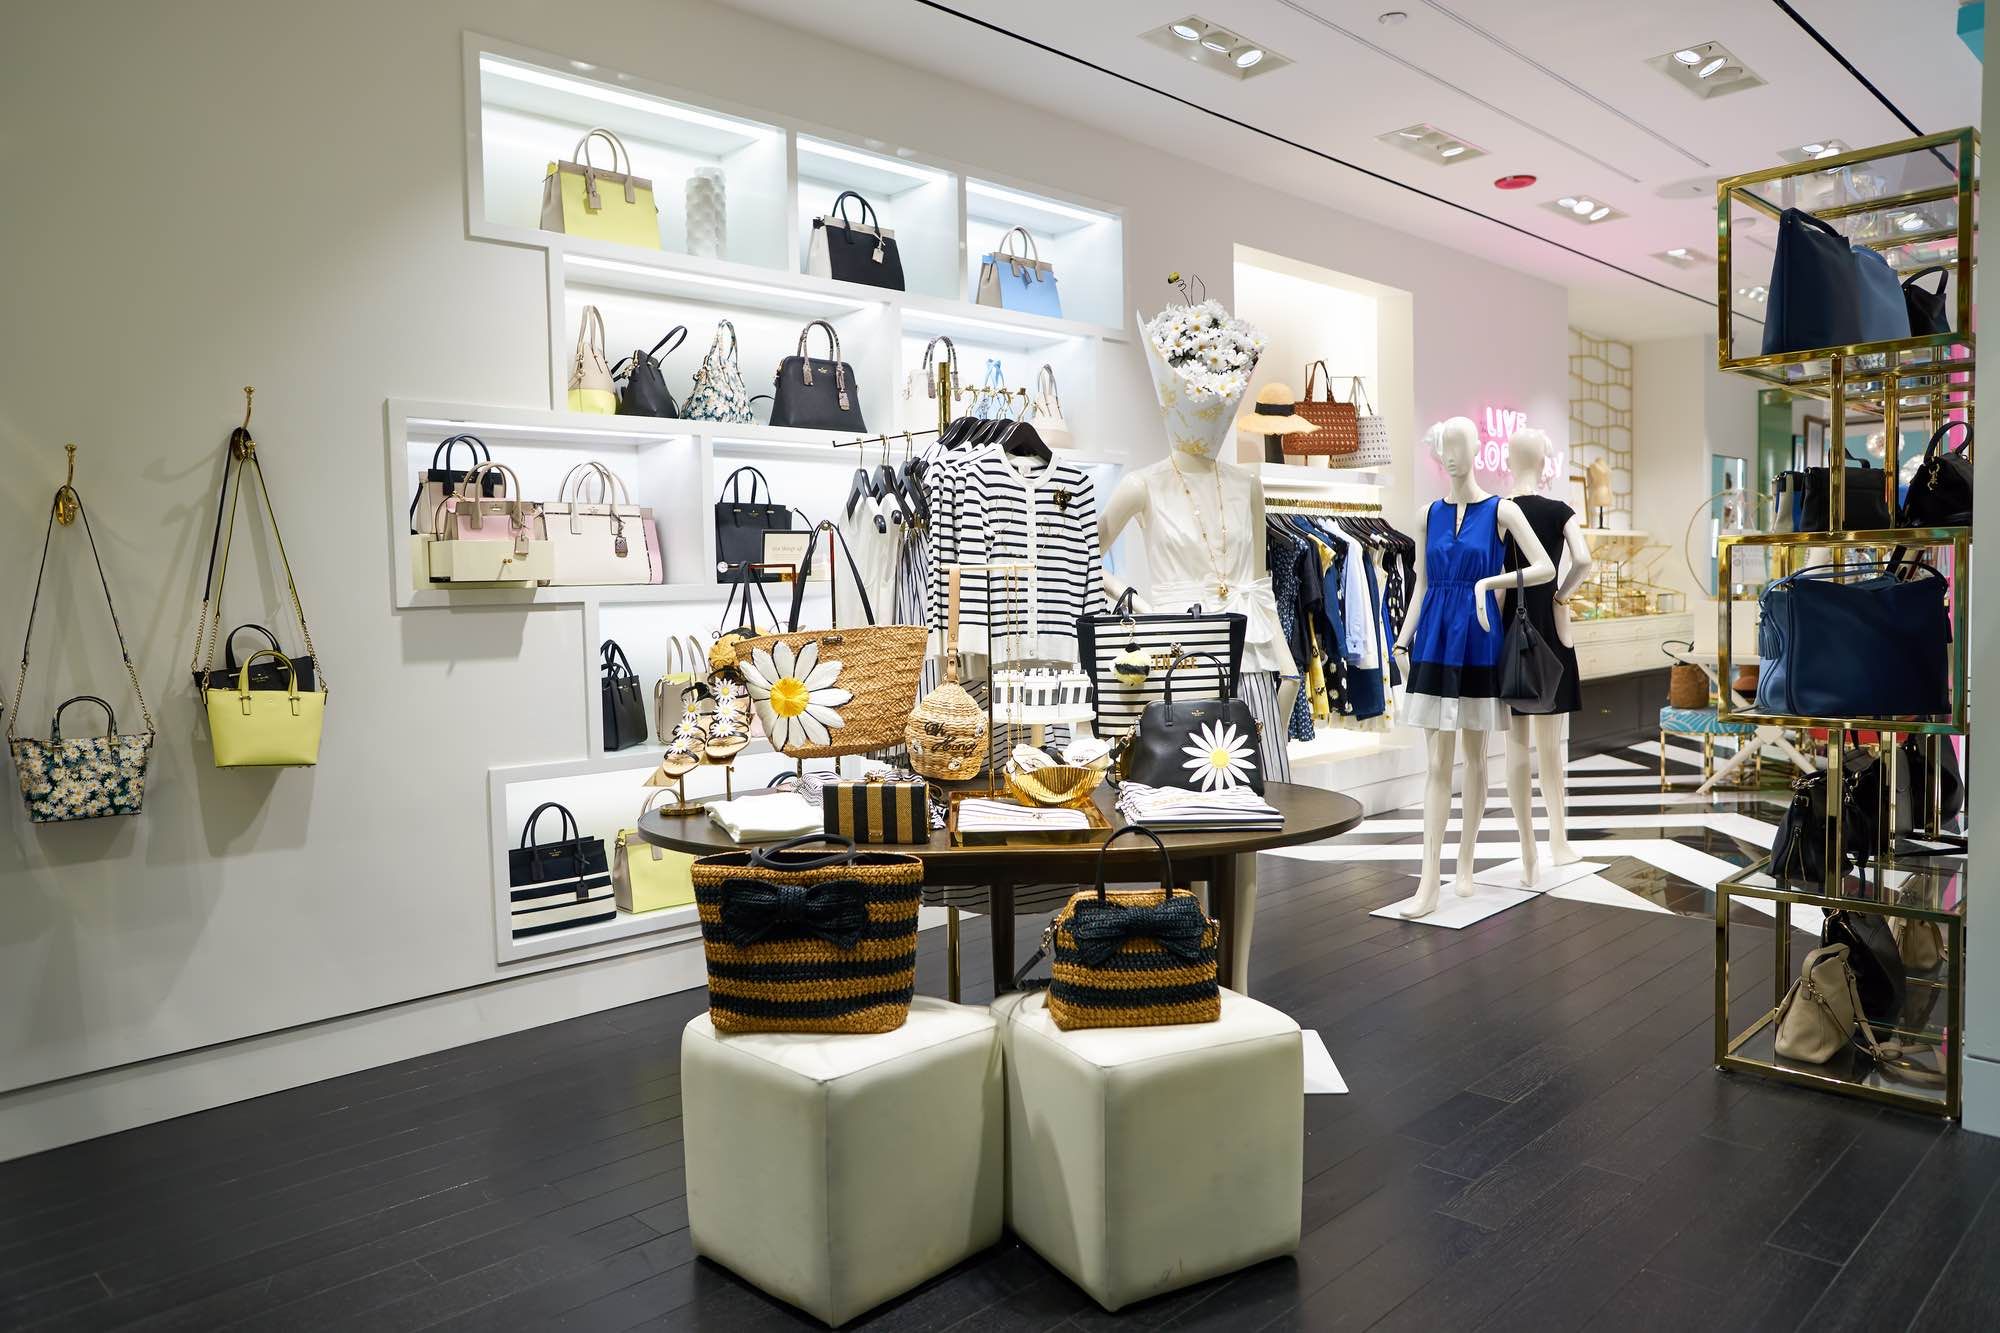 Kate Spade Class Action Alleges Fake Discount Scheme - Top Class Actions